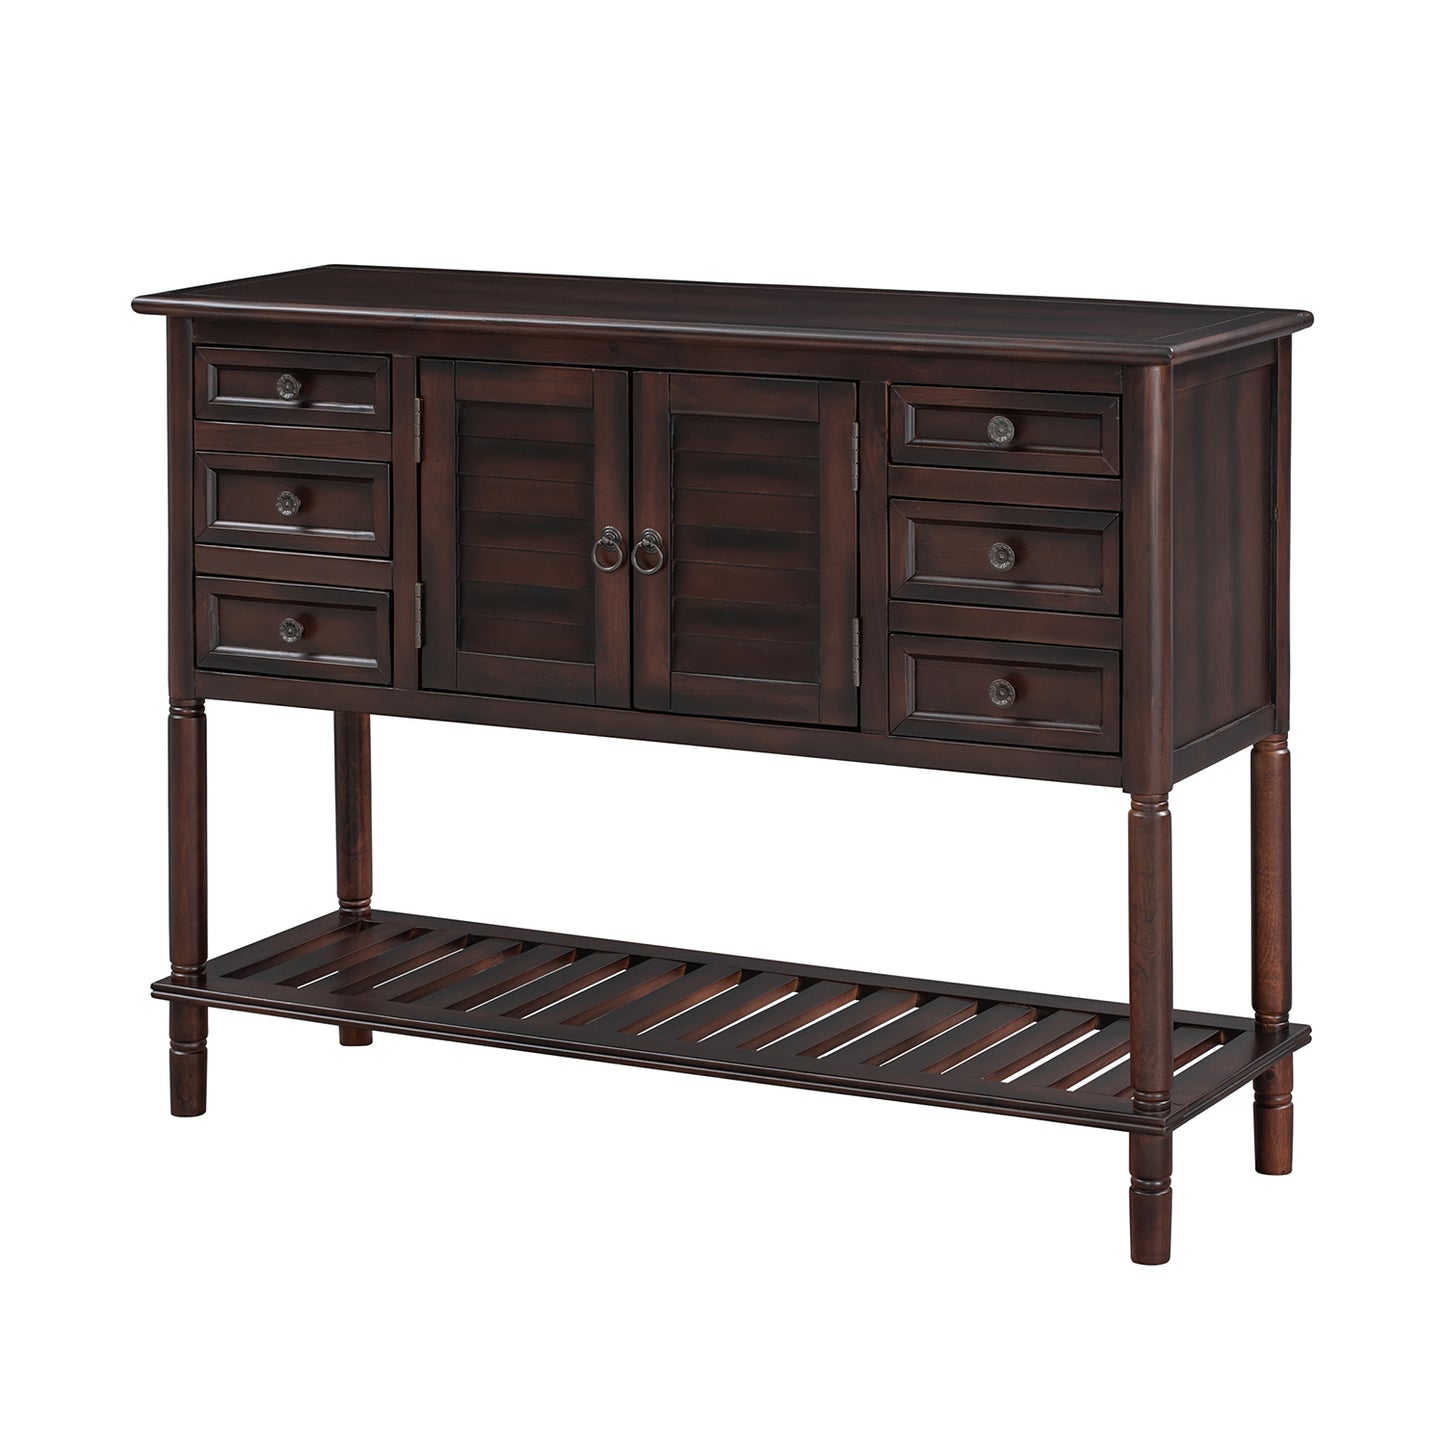 Liber 45.2” Wide Buffet Table with 6 Drawers